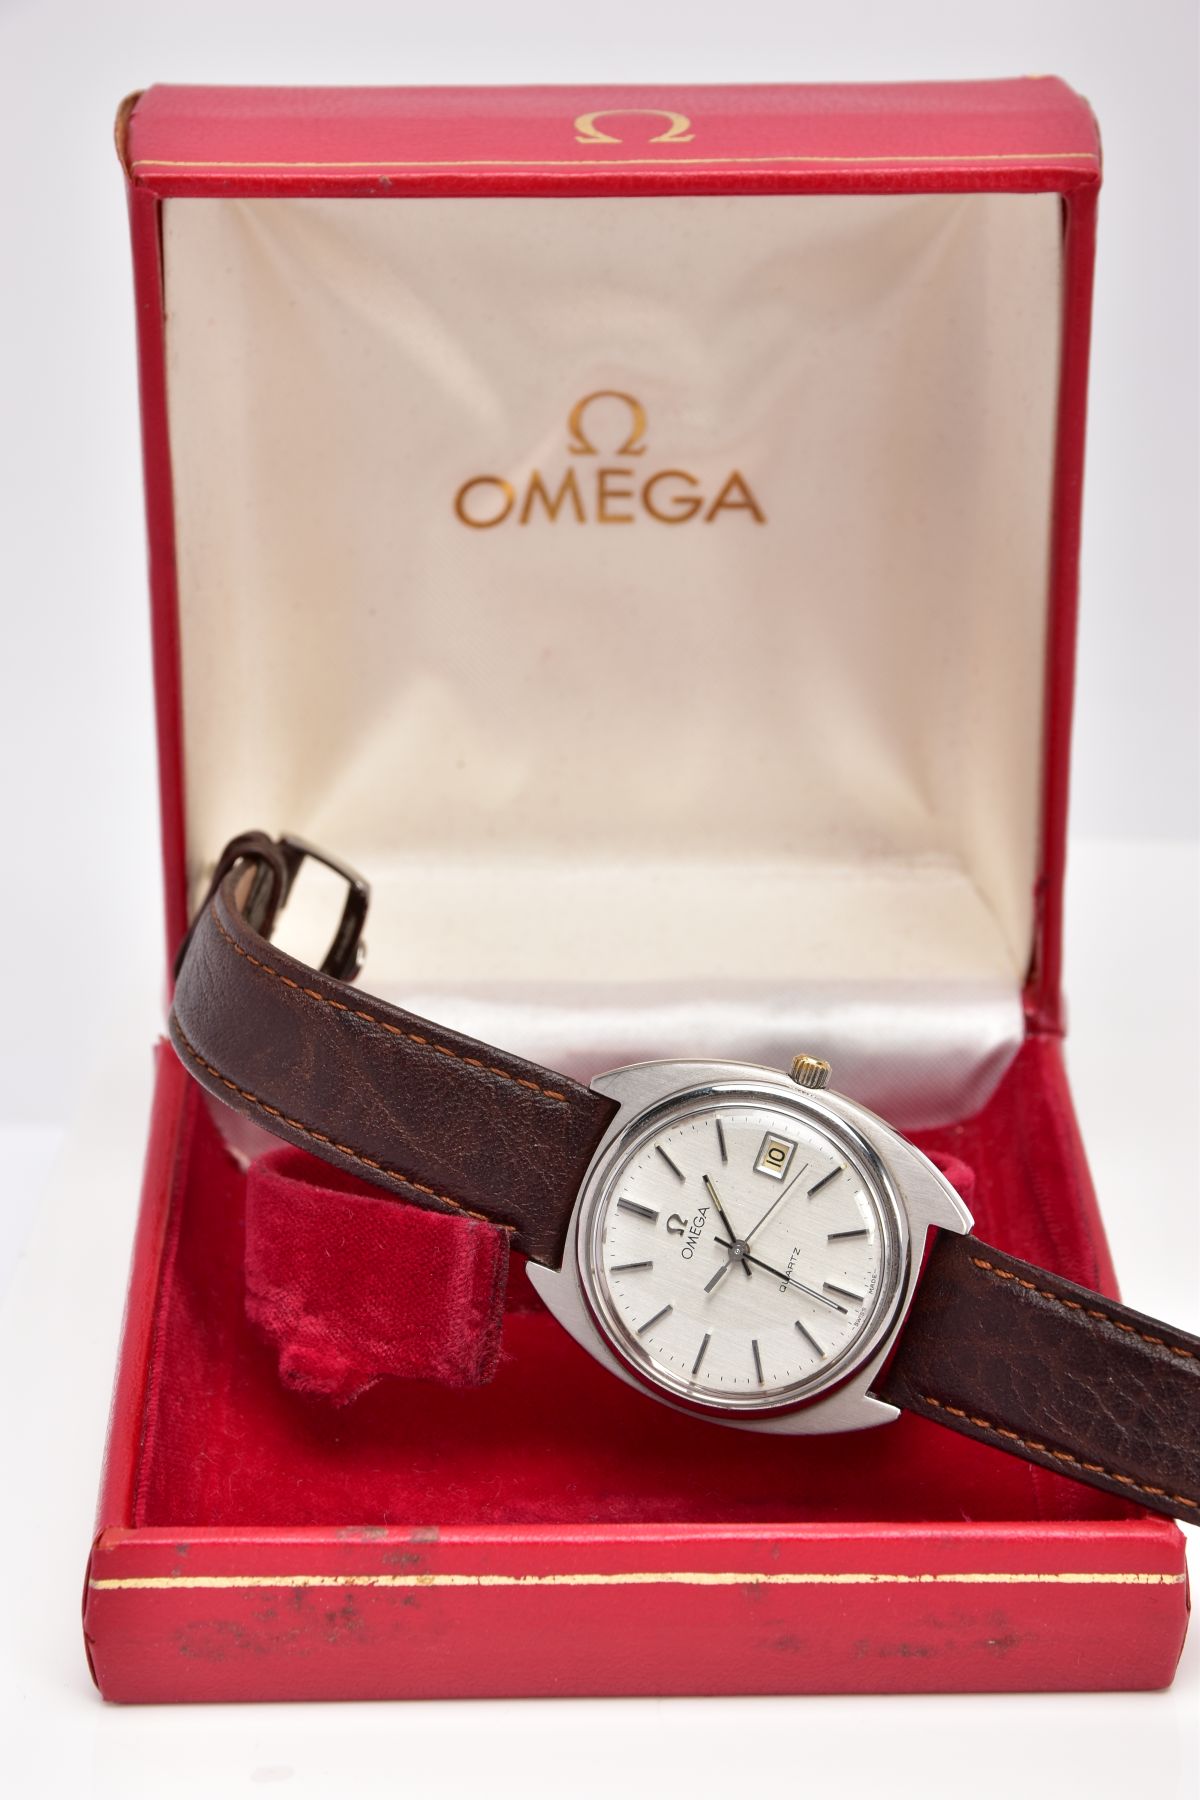 A GENTLEMAN'S OMEGA WRISTWATCH WITH BOX, the quartz watch with circular face, baton markers, date - Image 6 of 6